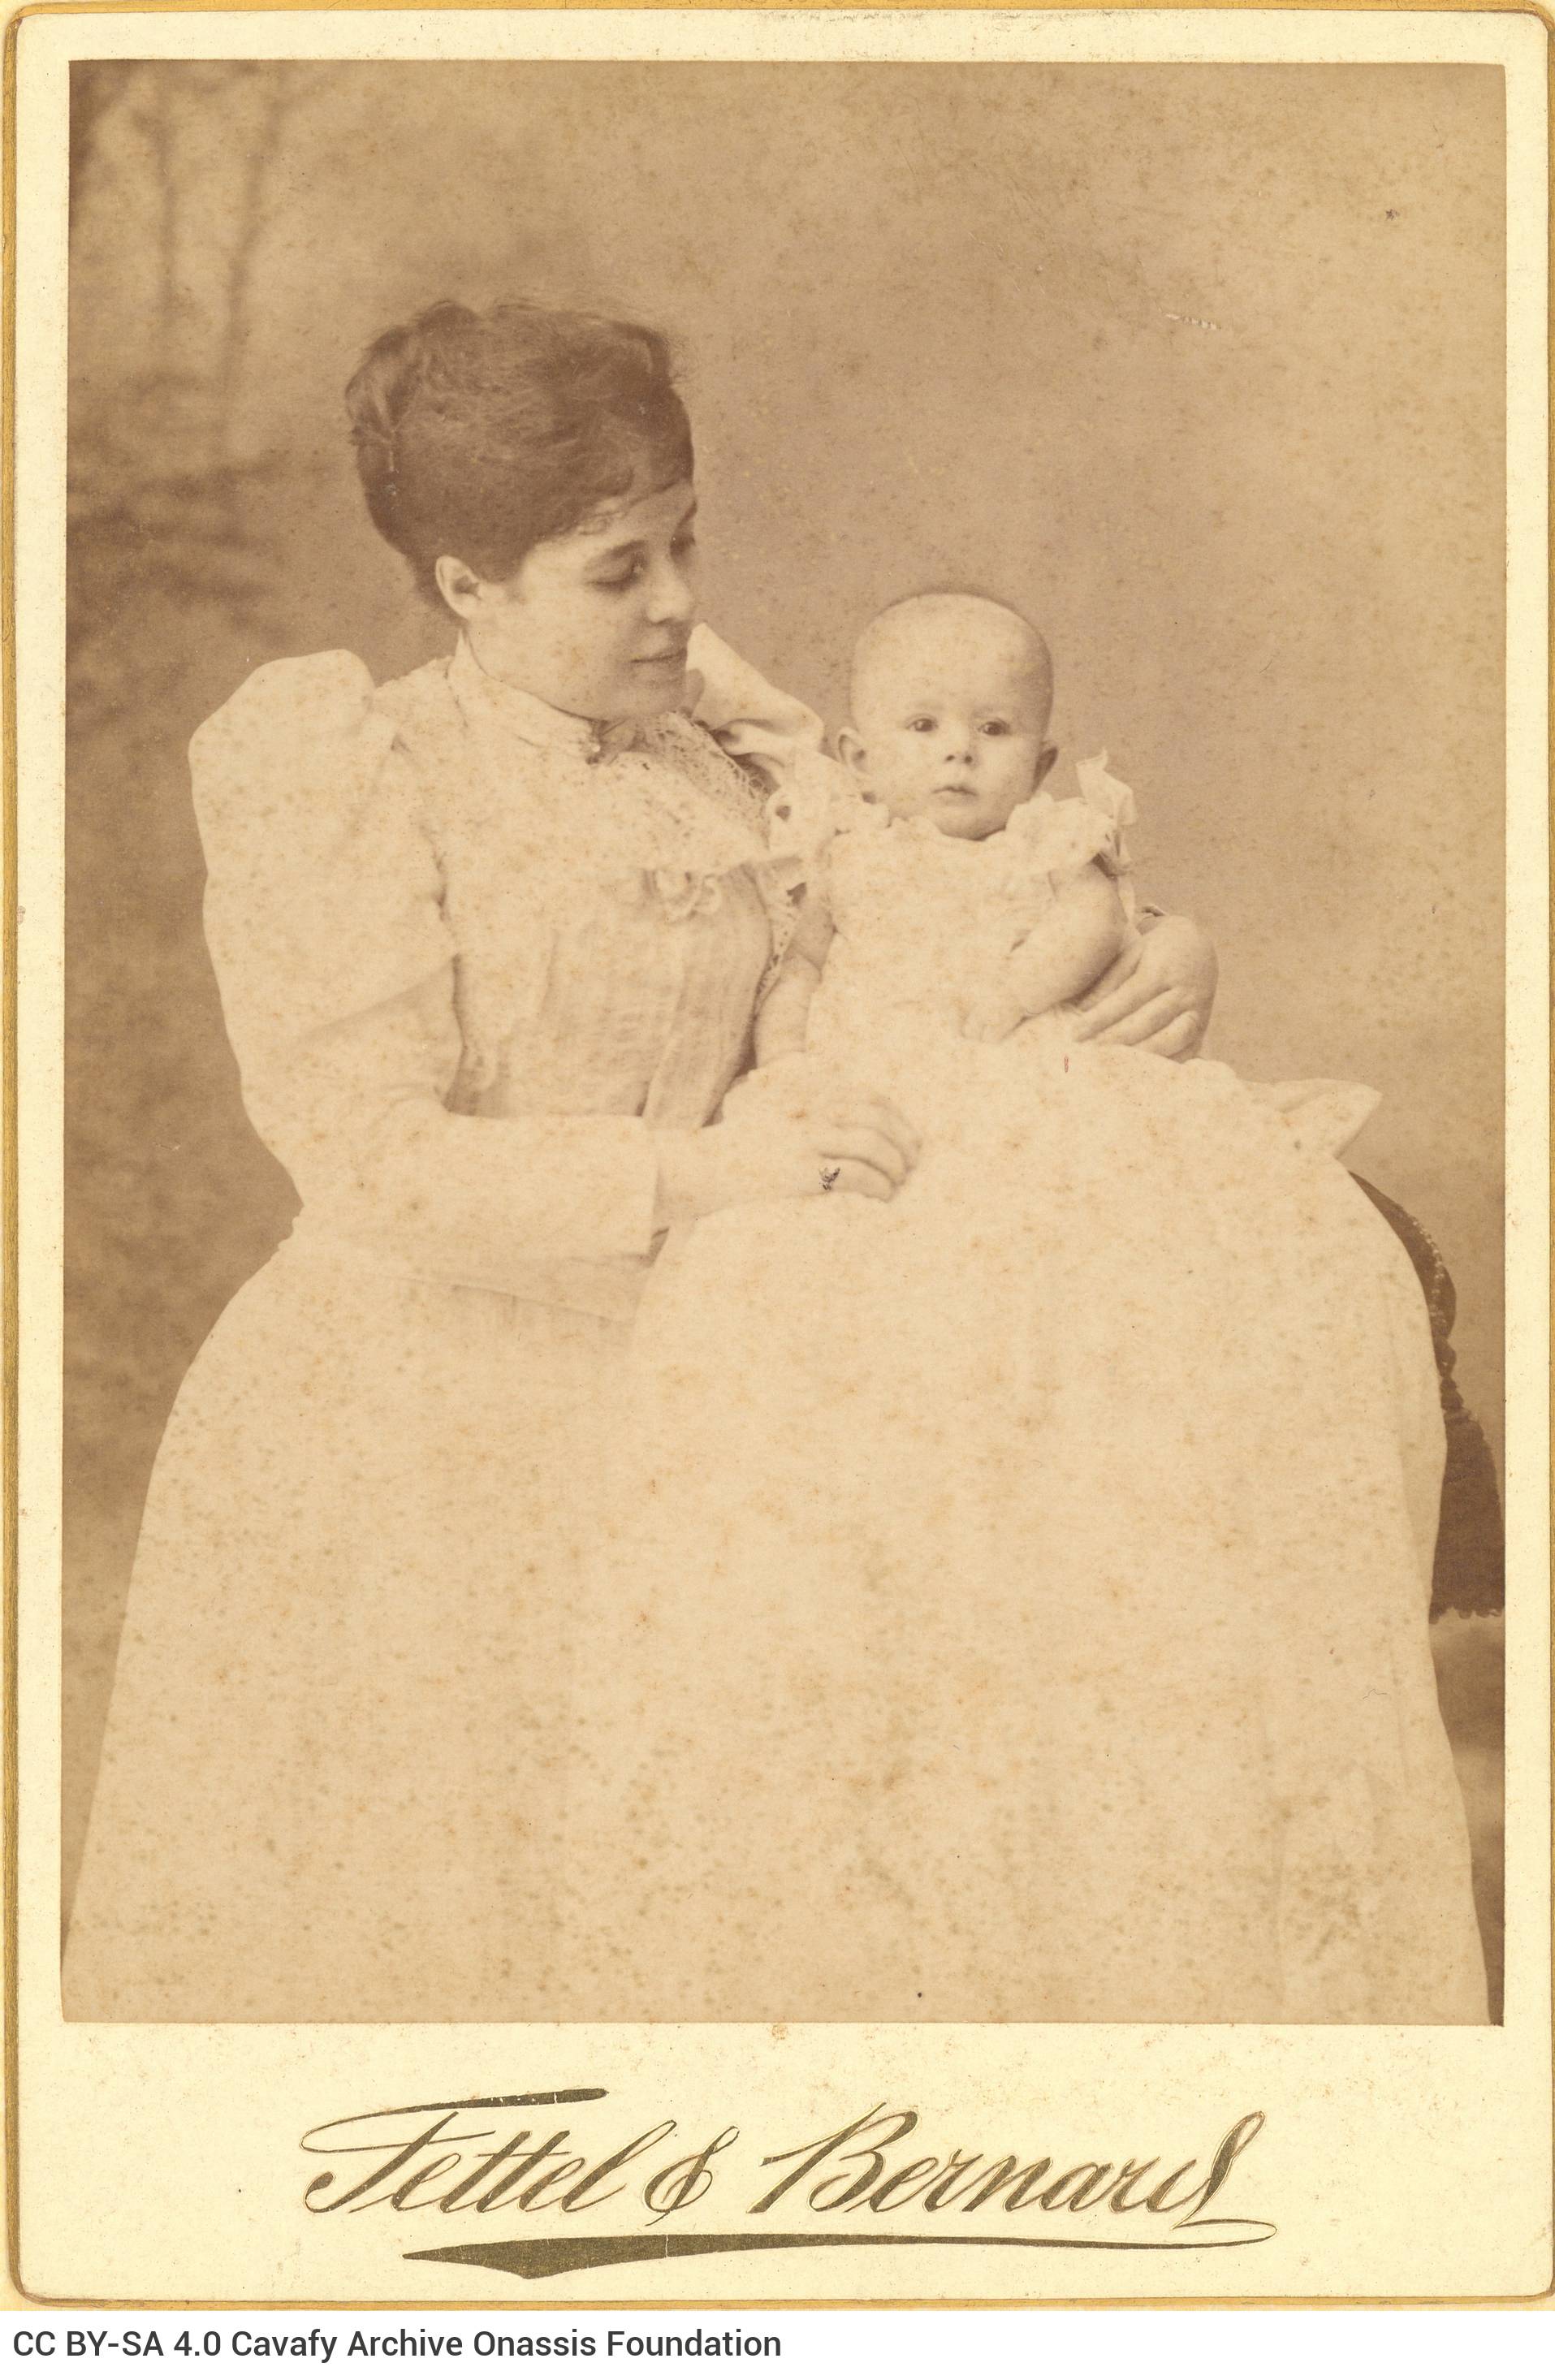 Photograph of Maria (Marie) Cavafy, wife of Aristeidis Cavafy, née Vourou, with their daughter Charikleia in her arms. It is